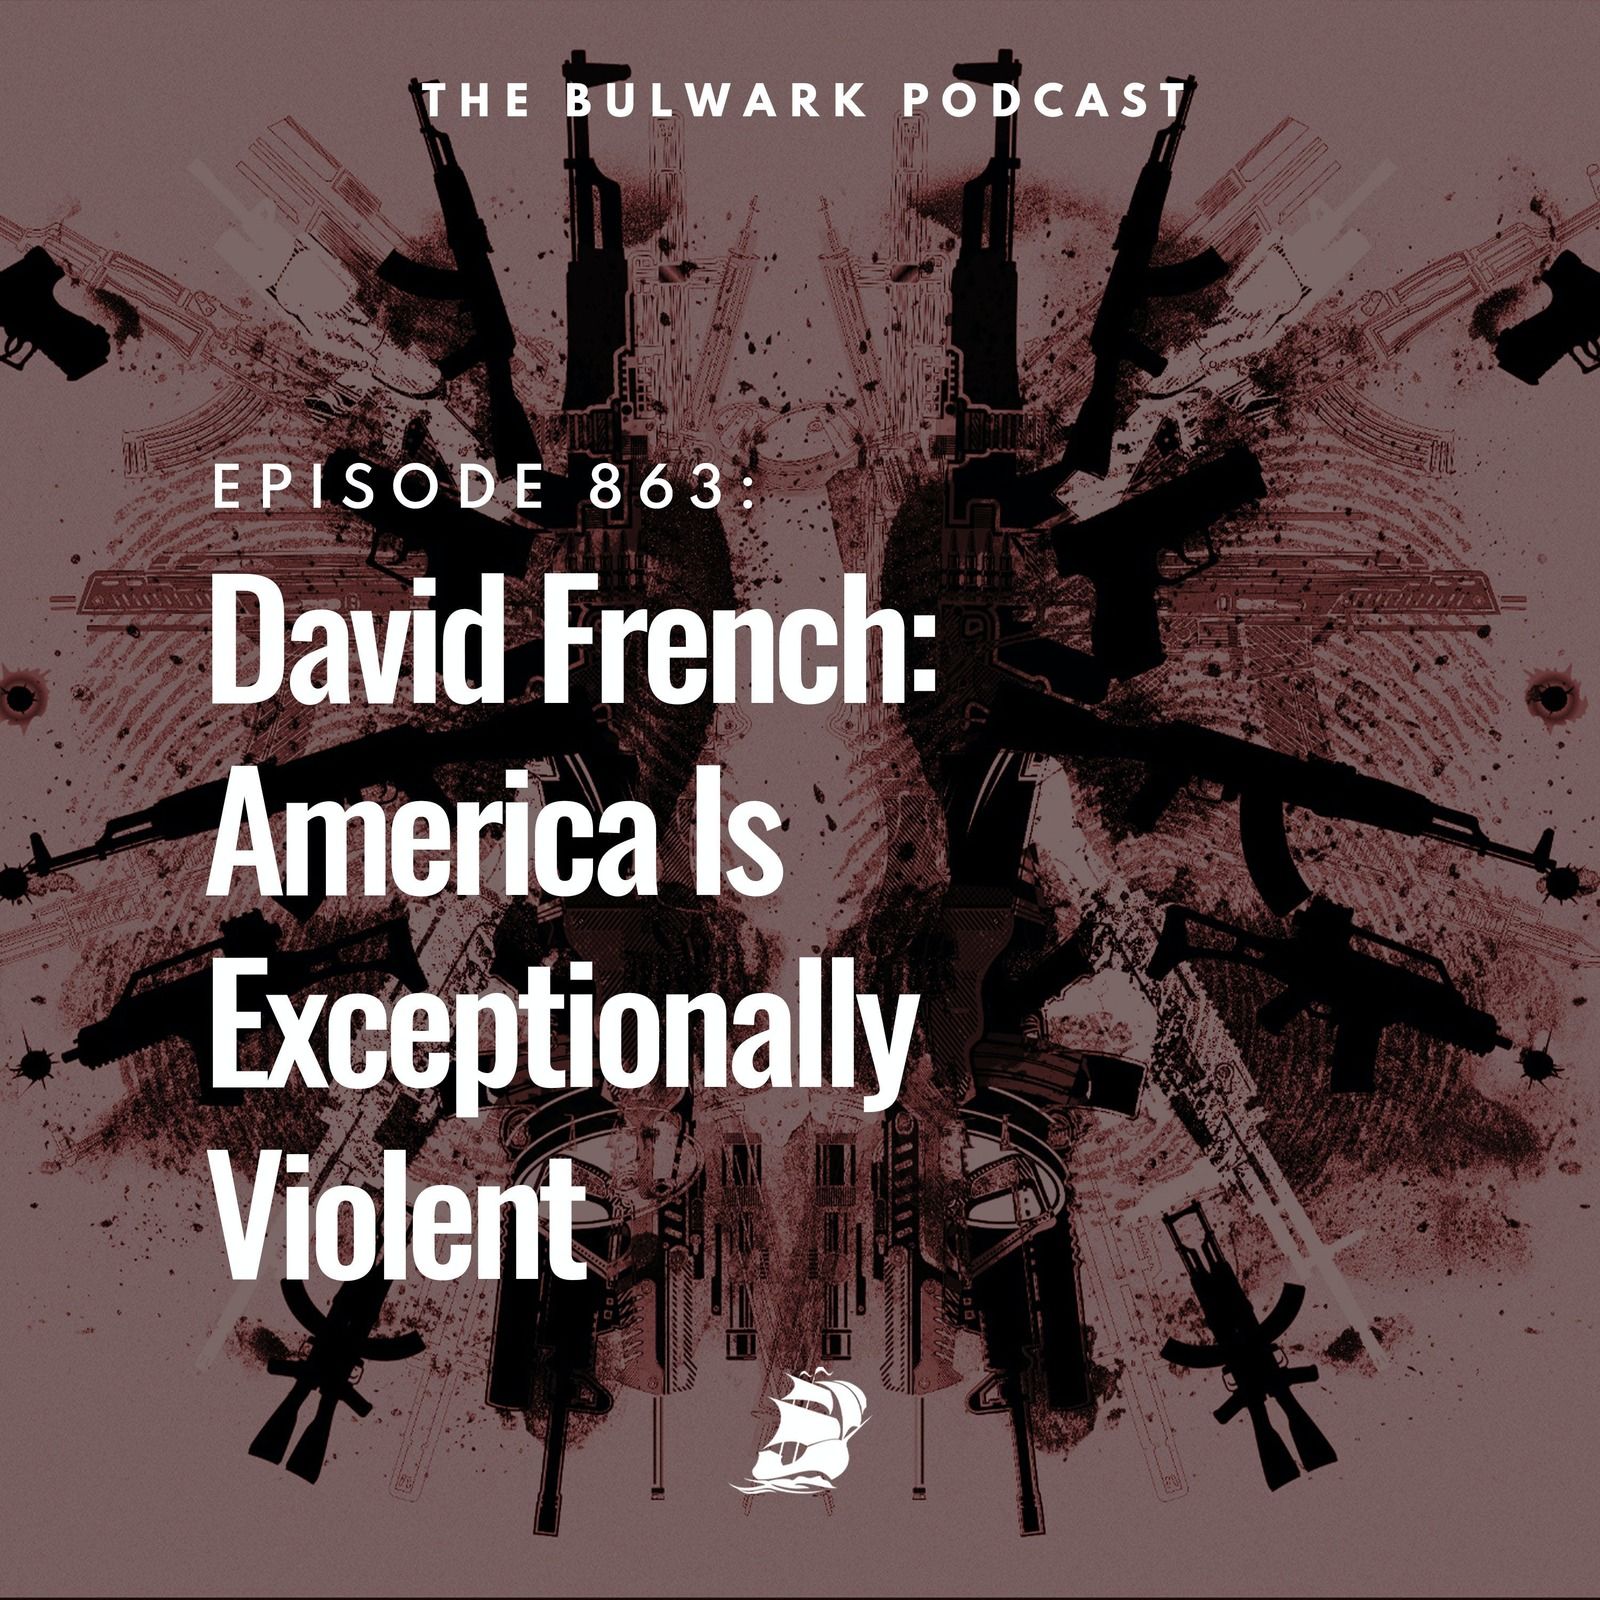 David French: America Is Exceptionally Violent by The Bulwark Podcast